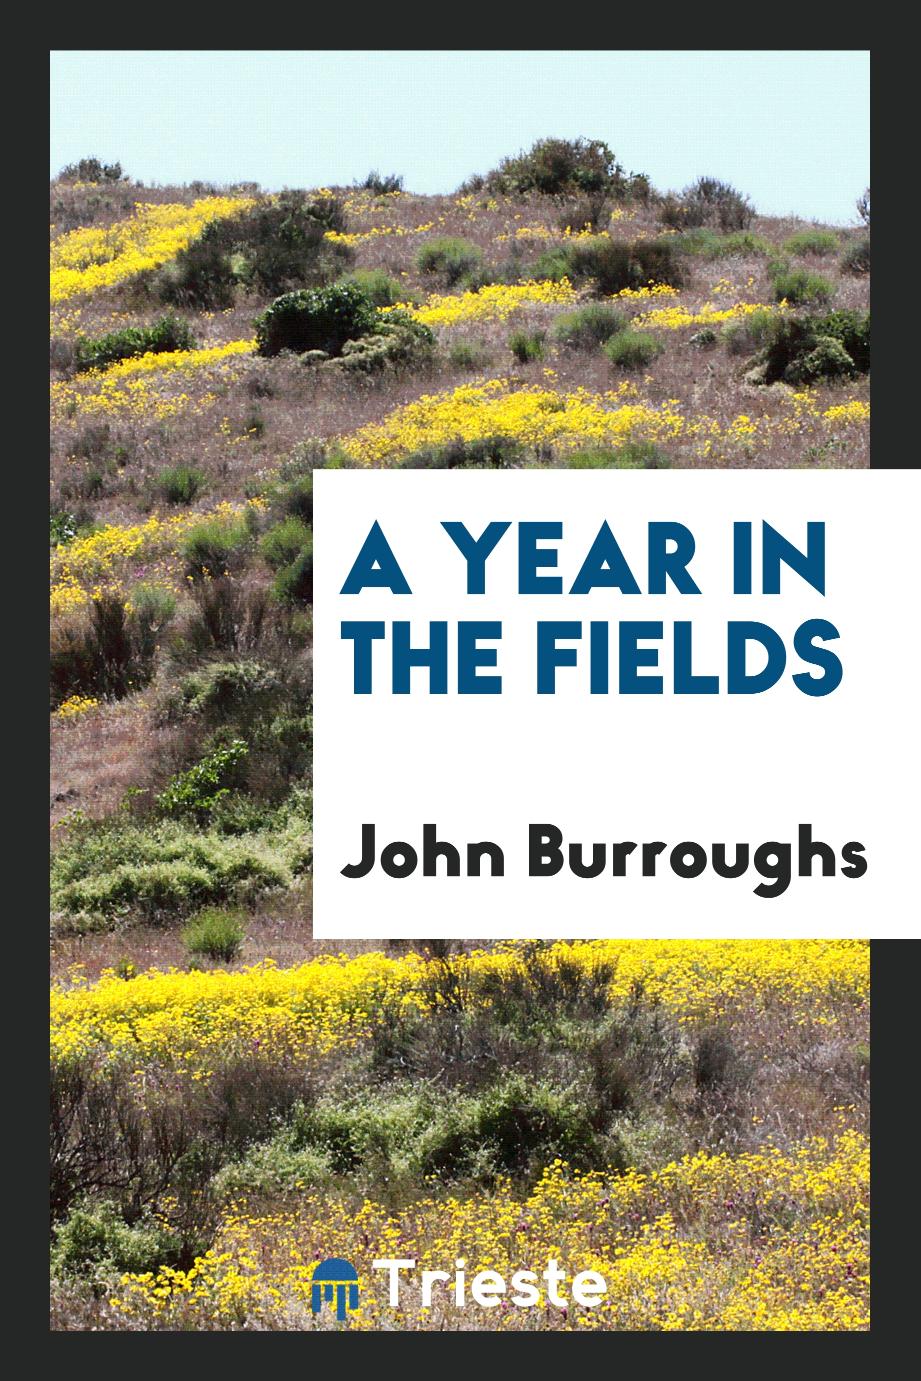 A year in the fields